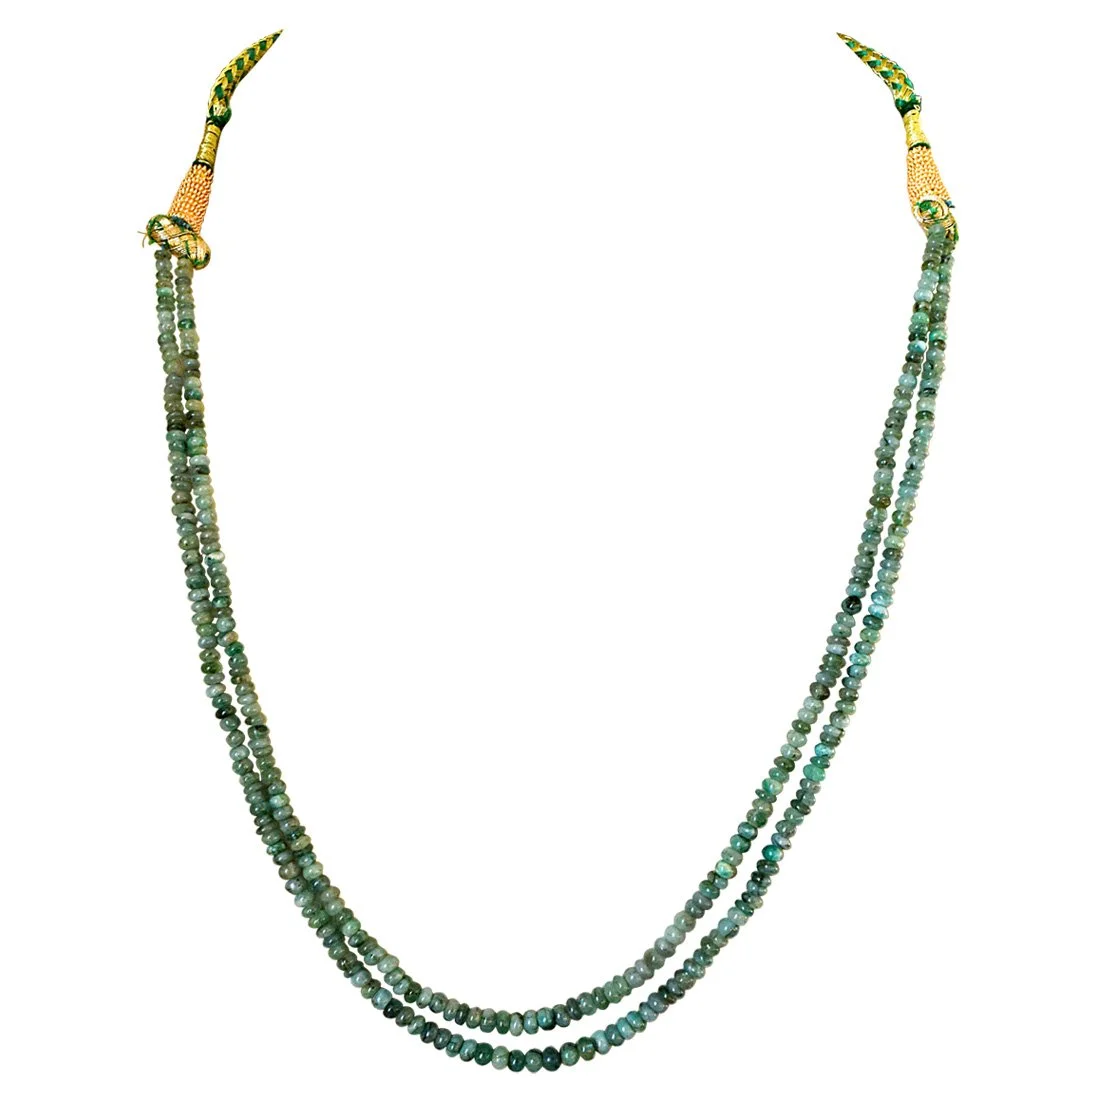 Two Line 83cts REAL Natural Green Emerald Beads Necklace for Women (83cts EMR Neck)